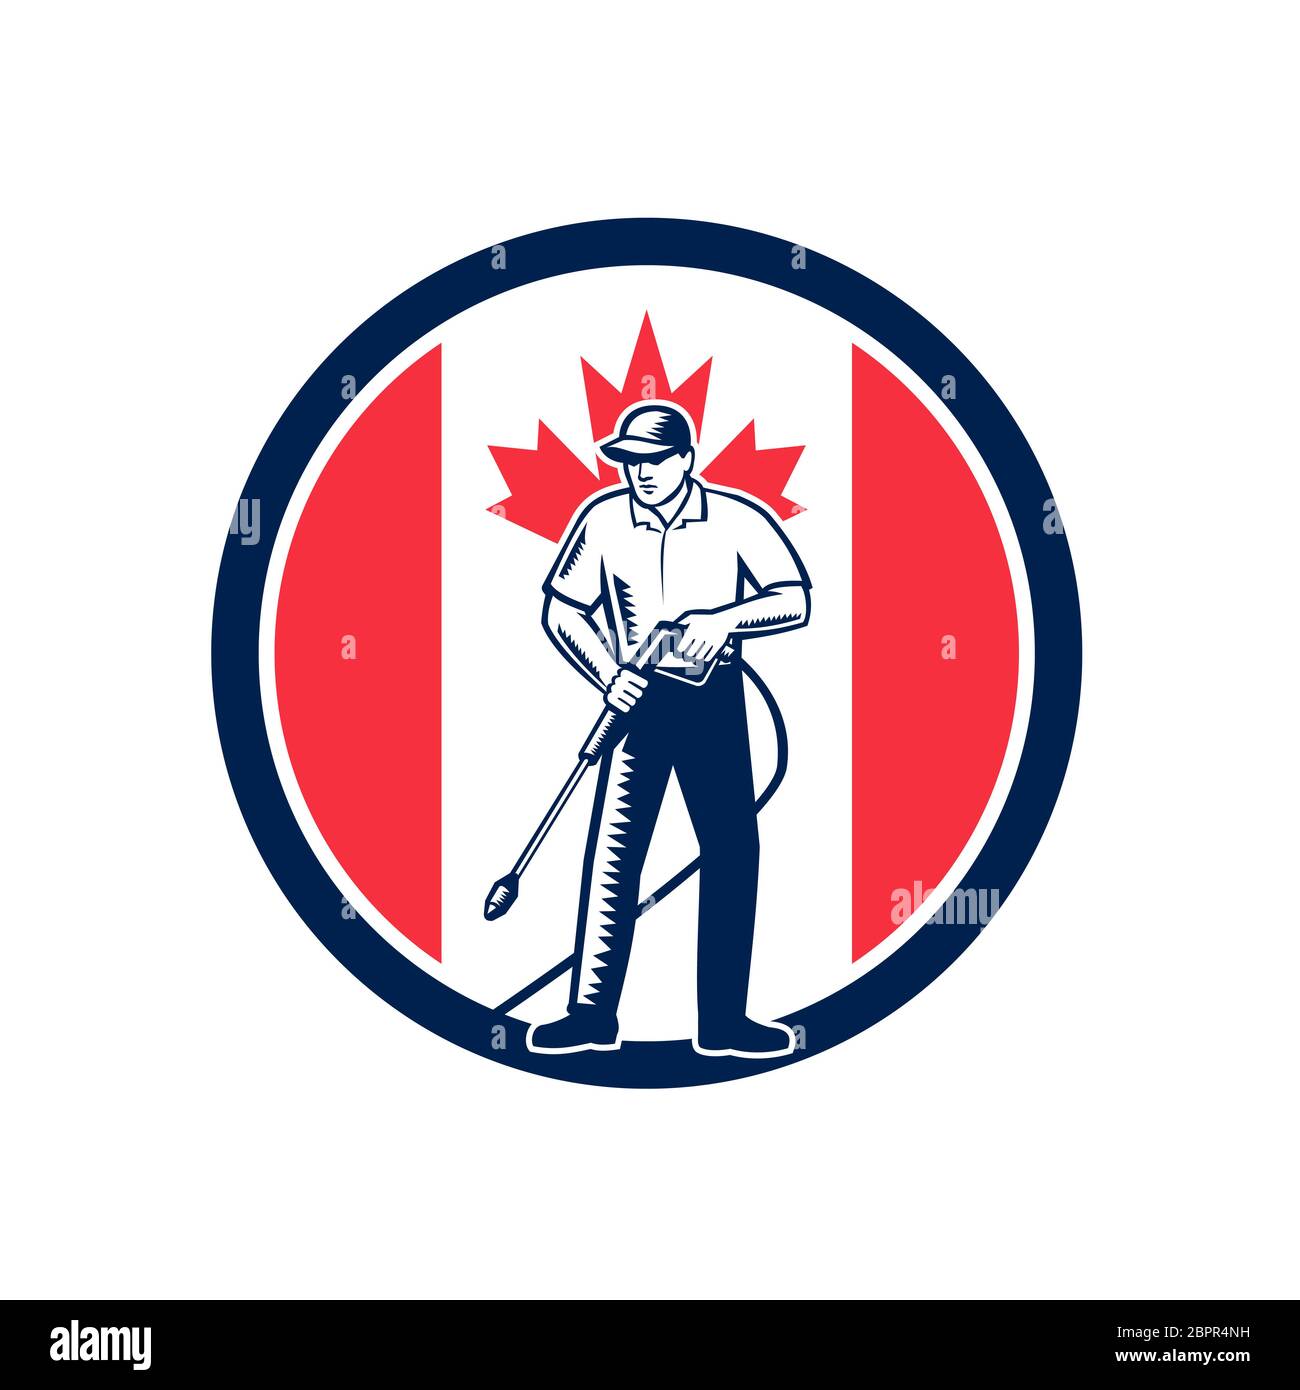 Illustration of a Canadian worker with pressure washer chemical washing using high-pressure water spray with Canada maple leaf flag set inside circle Stock Photo